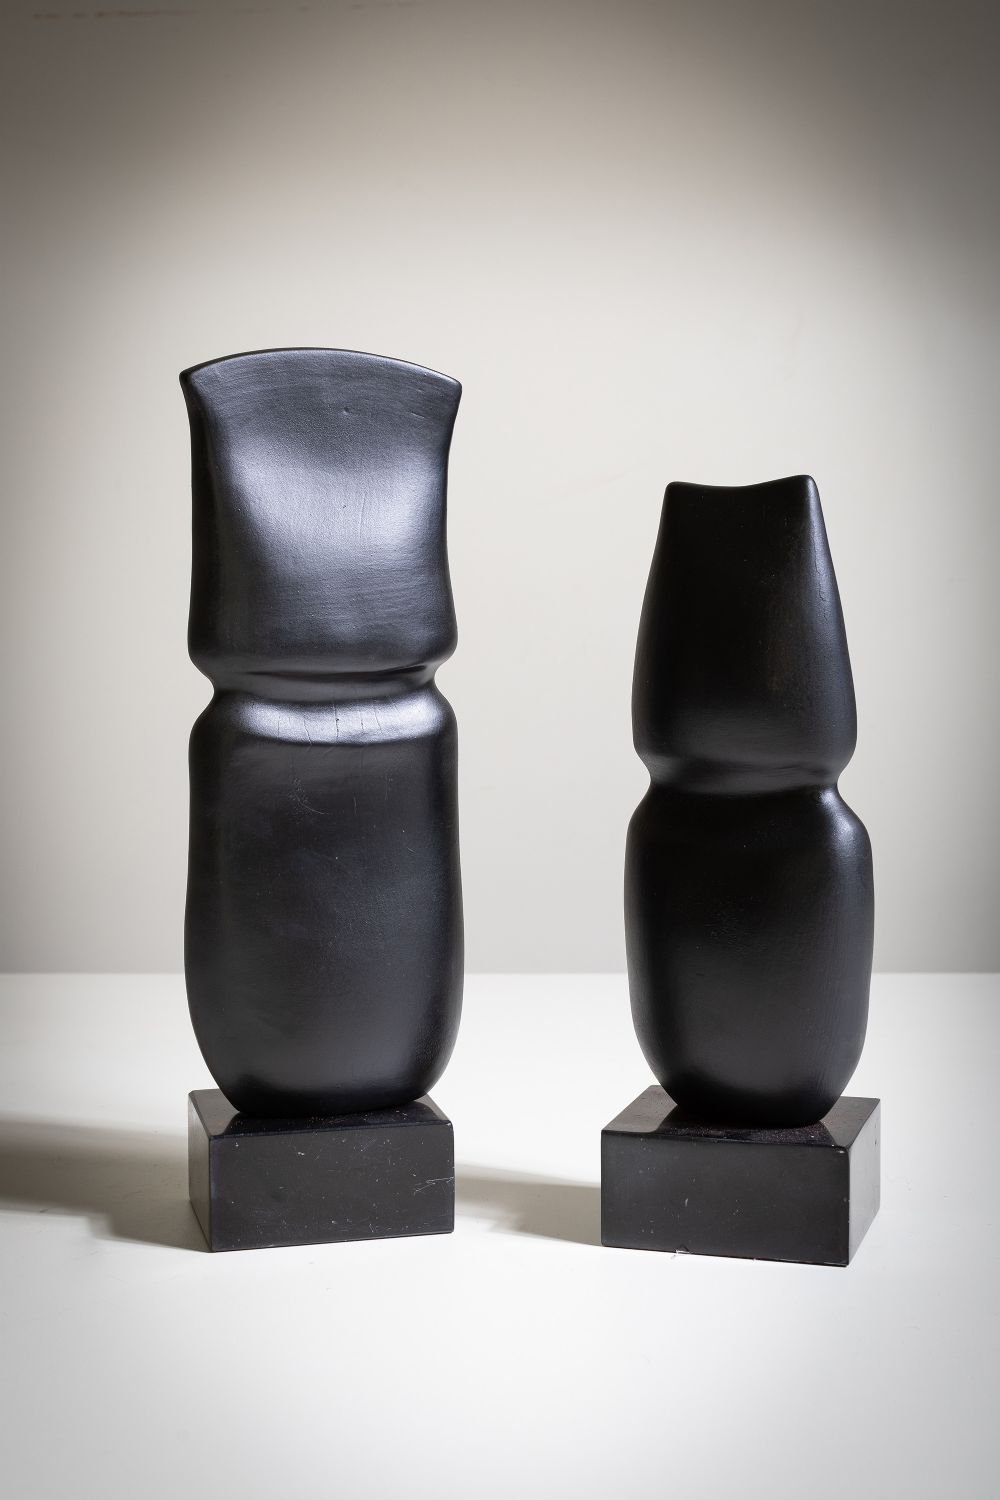 TOTEMS (2) by Sonja Landweer sold for €2,800 at deVeres Auctions